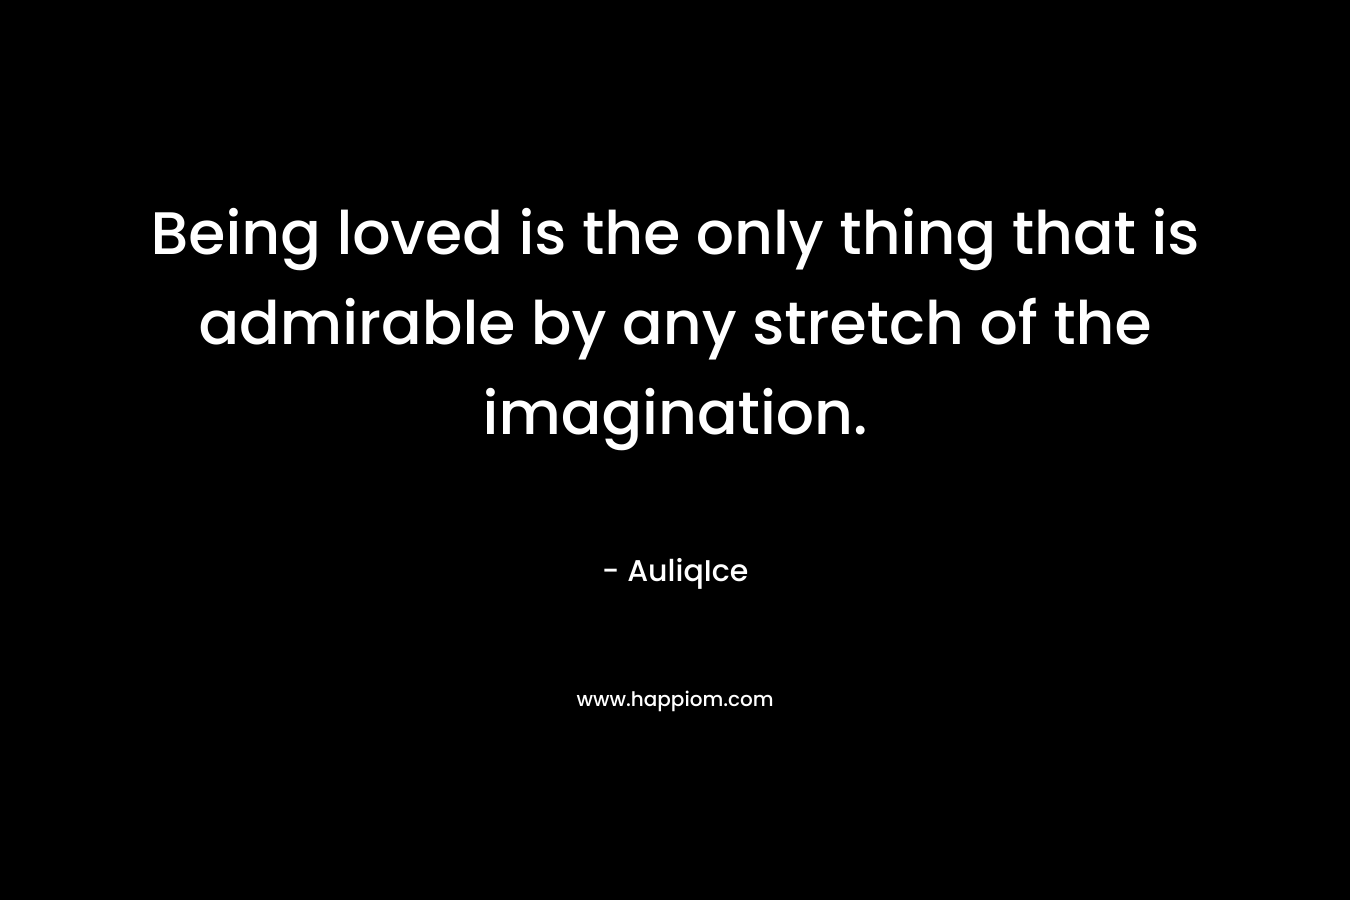 Being loved is the only thing that is admirable by any stretch of the imagination.